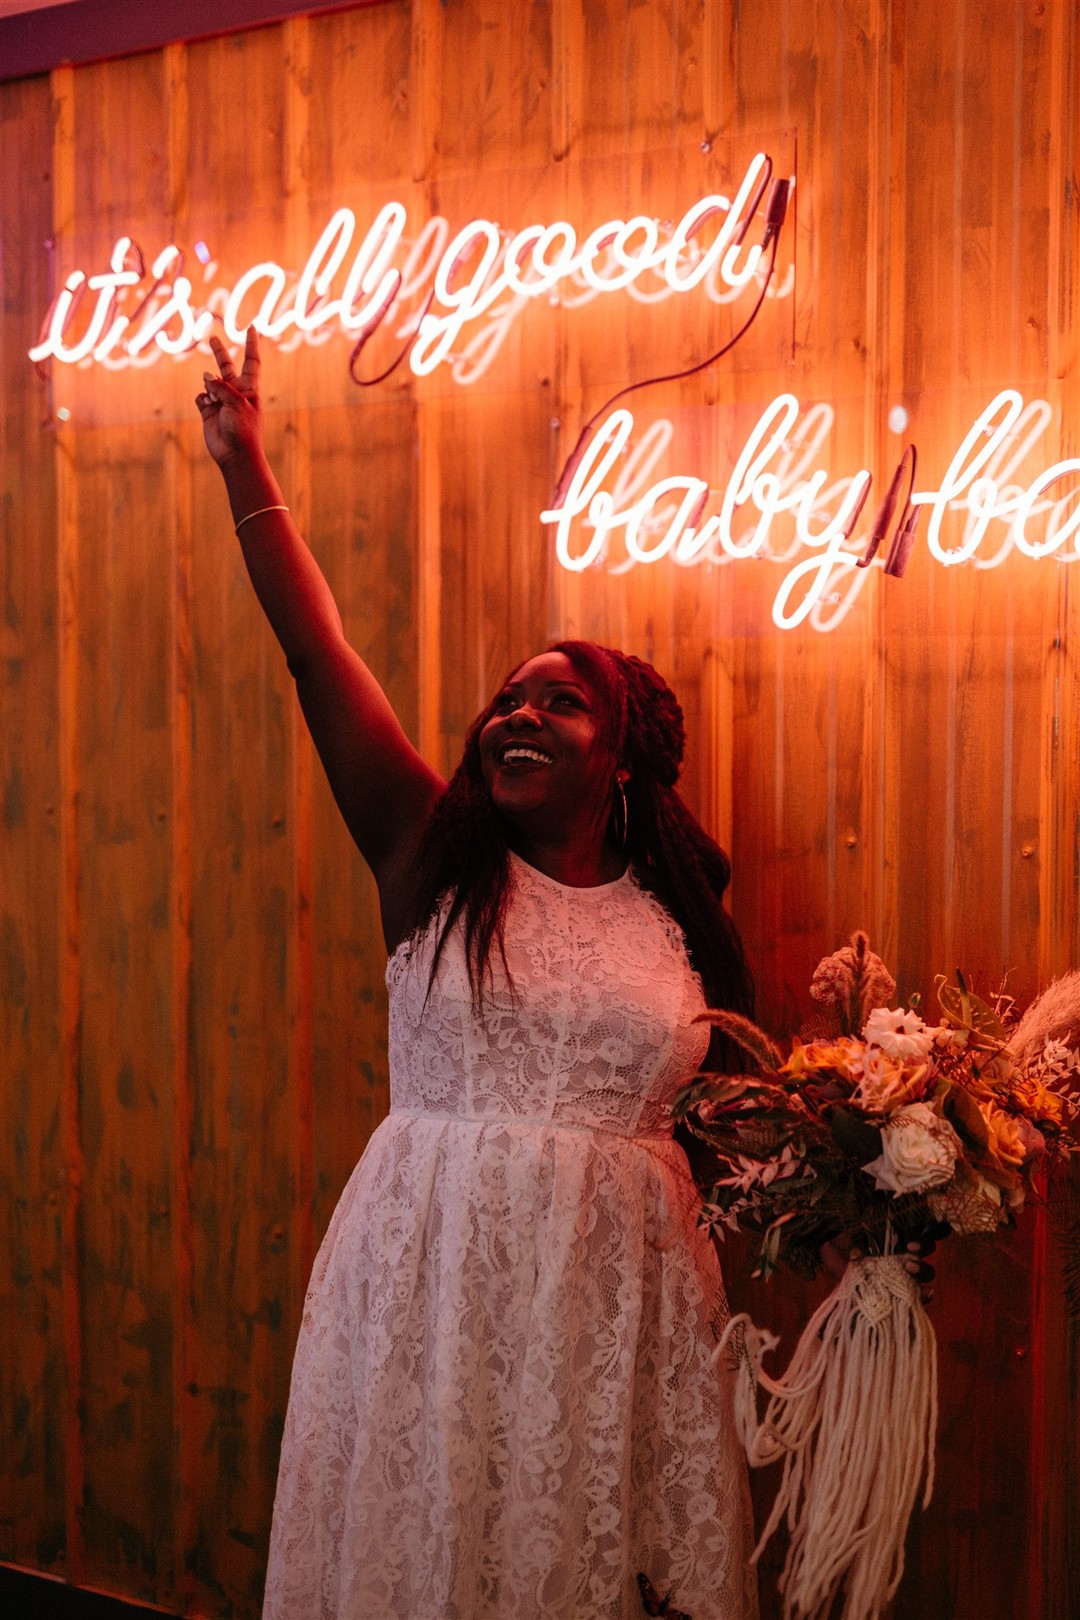 The wedding decor was done with neon lights, too, for a more modern and fresh touch